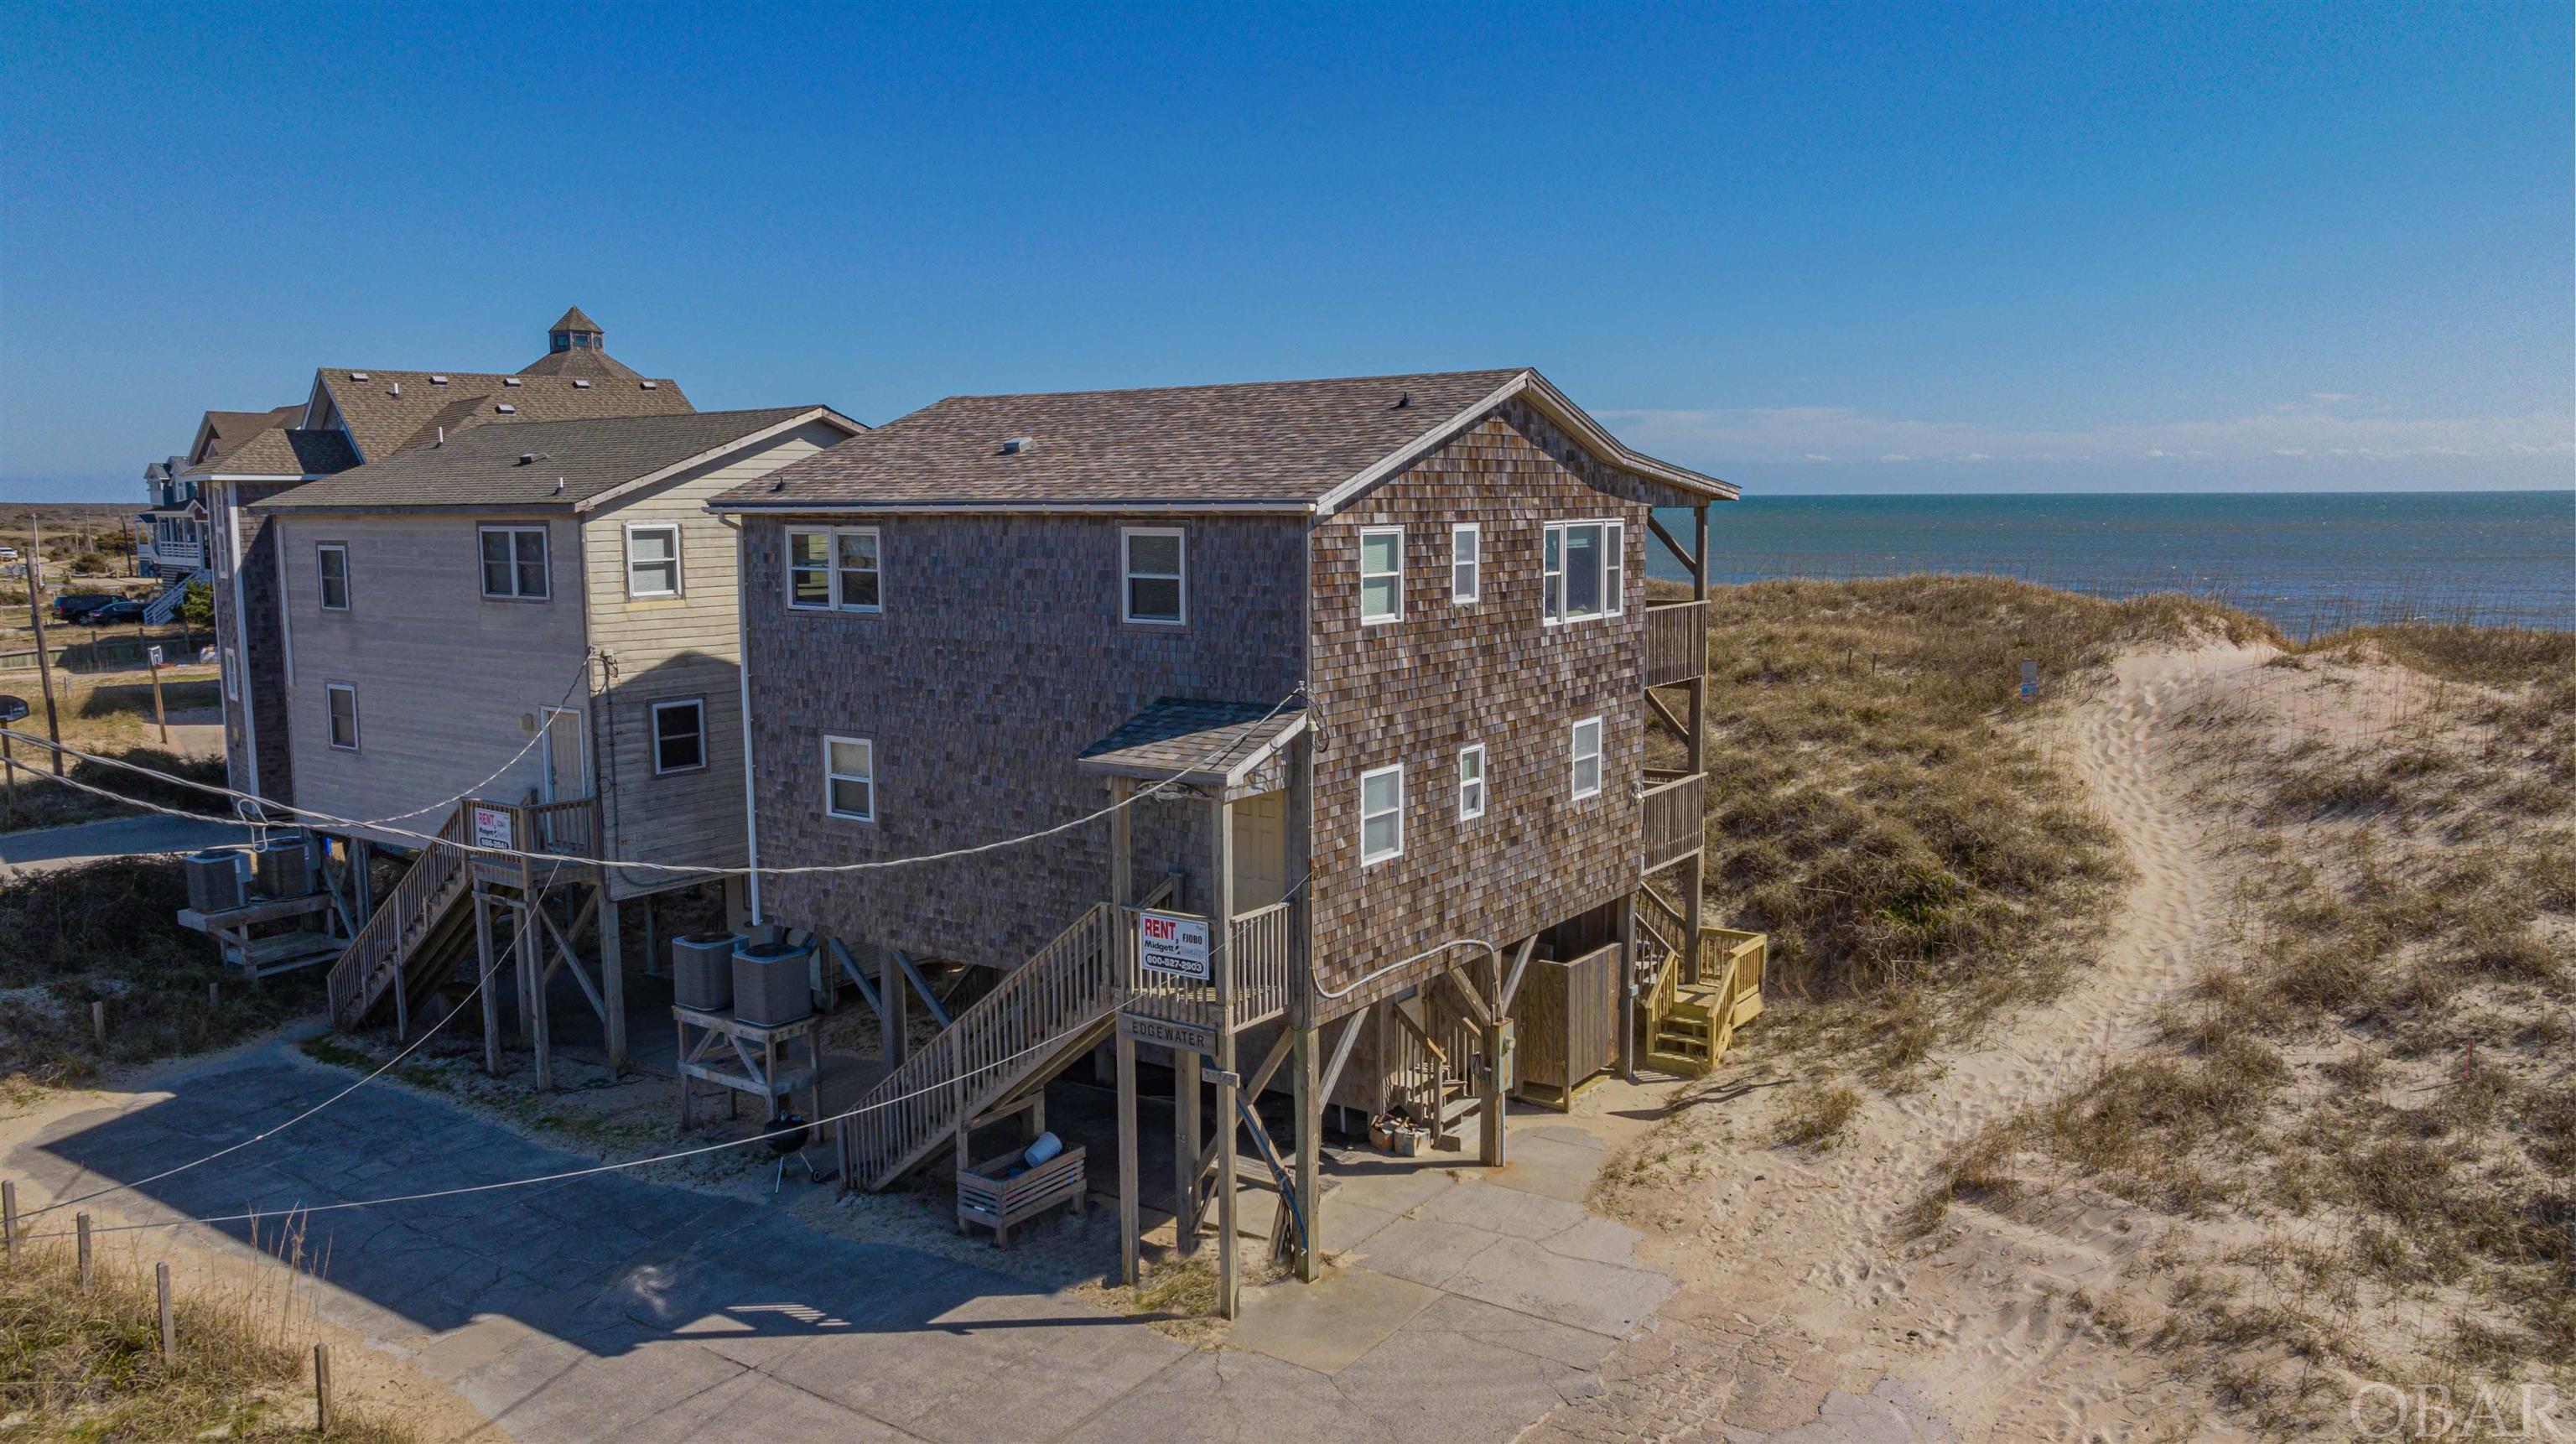 54243 Cape Hatteras Drive, Frisco, NC 27936, 4 Bedrooms Bedrooms, ,3 BathroomsBathrooms,Residential,For sale,Cape Hatteras Drive,123337